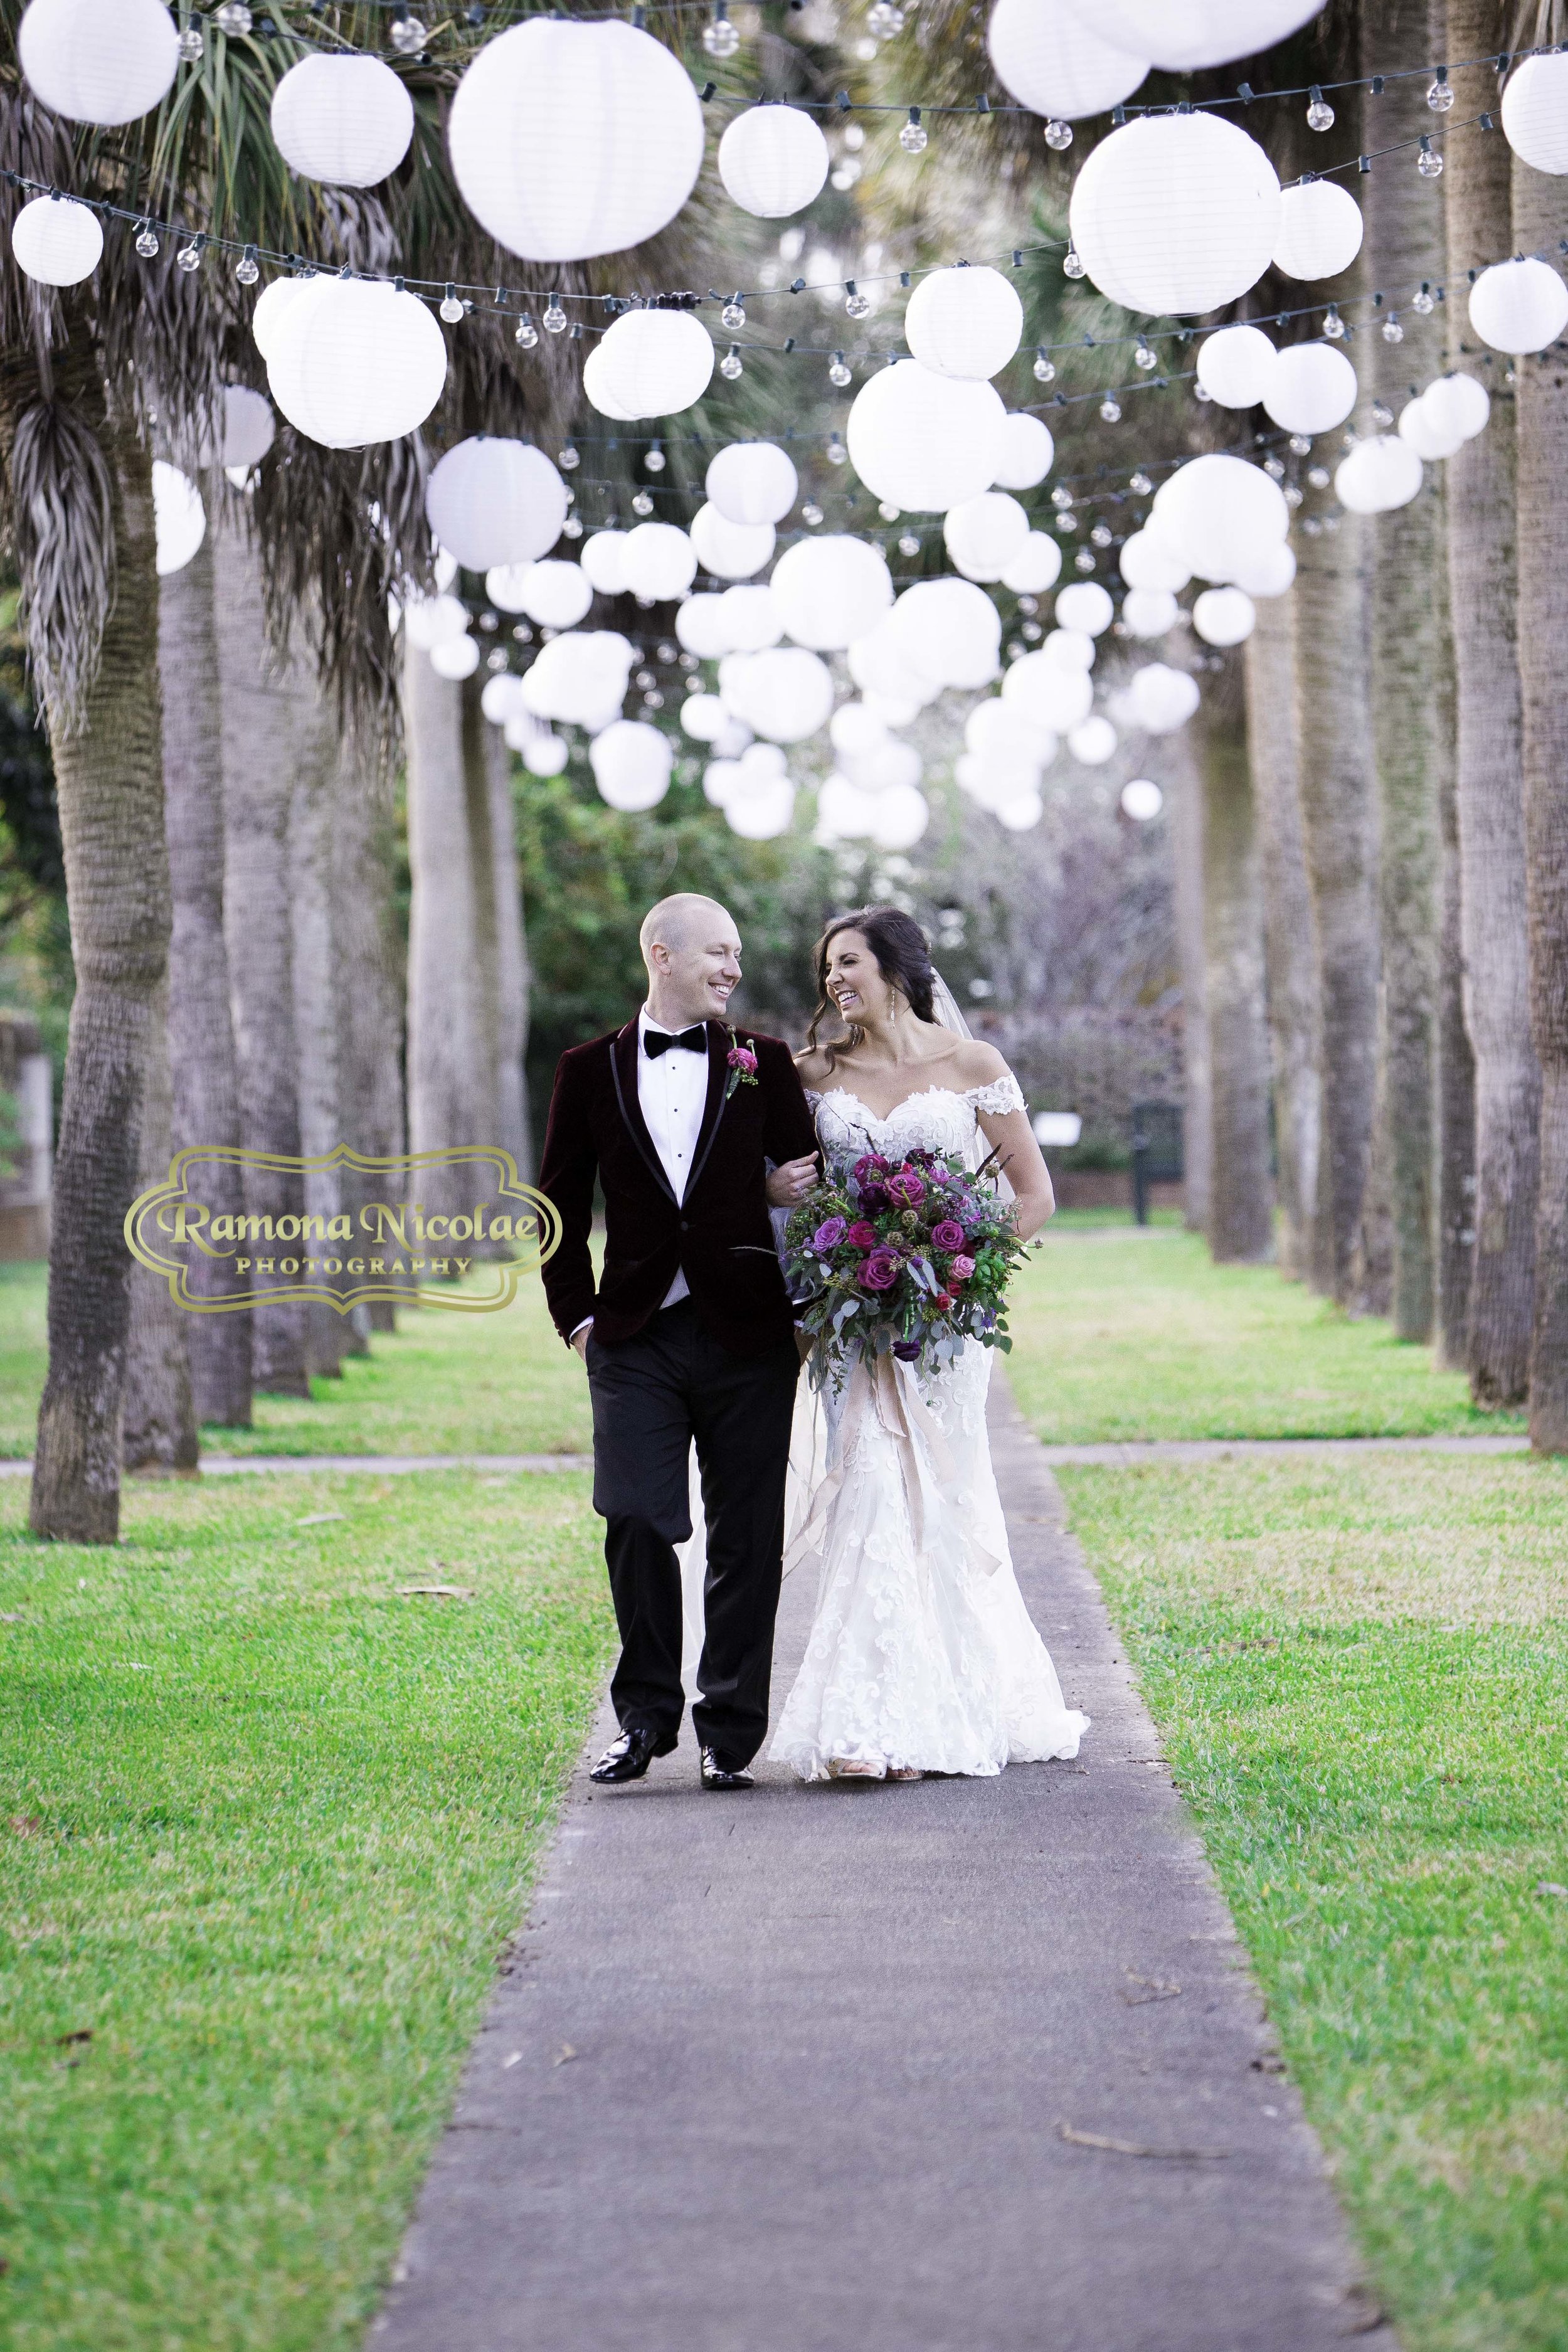 bride and groom walking at brookgreen gardens on their wedding day laughing holding wedding bouquet.jpg